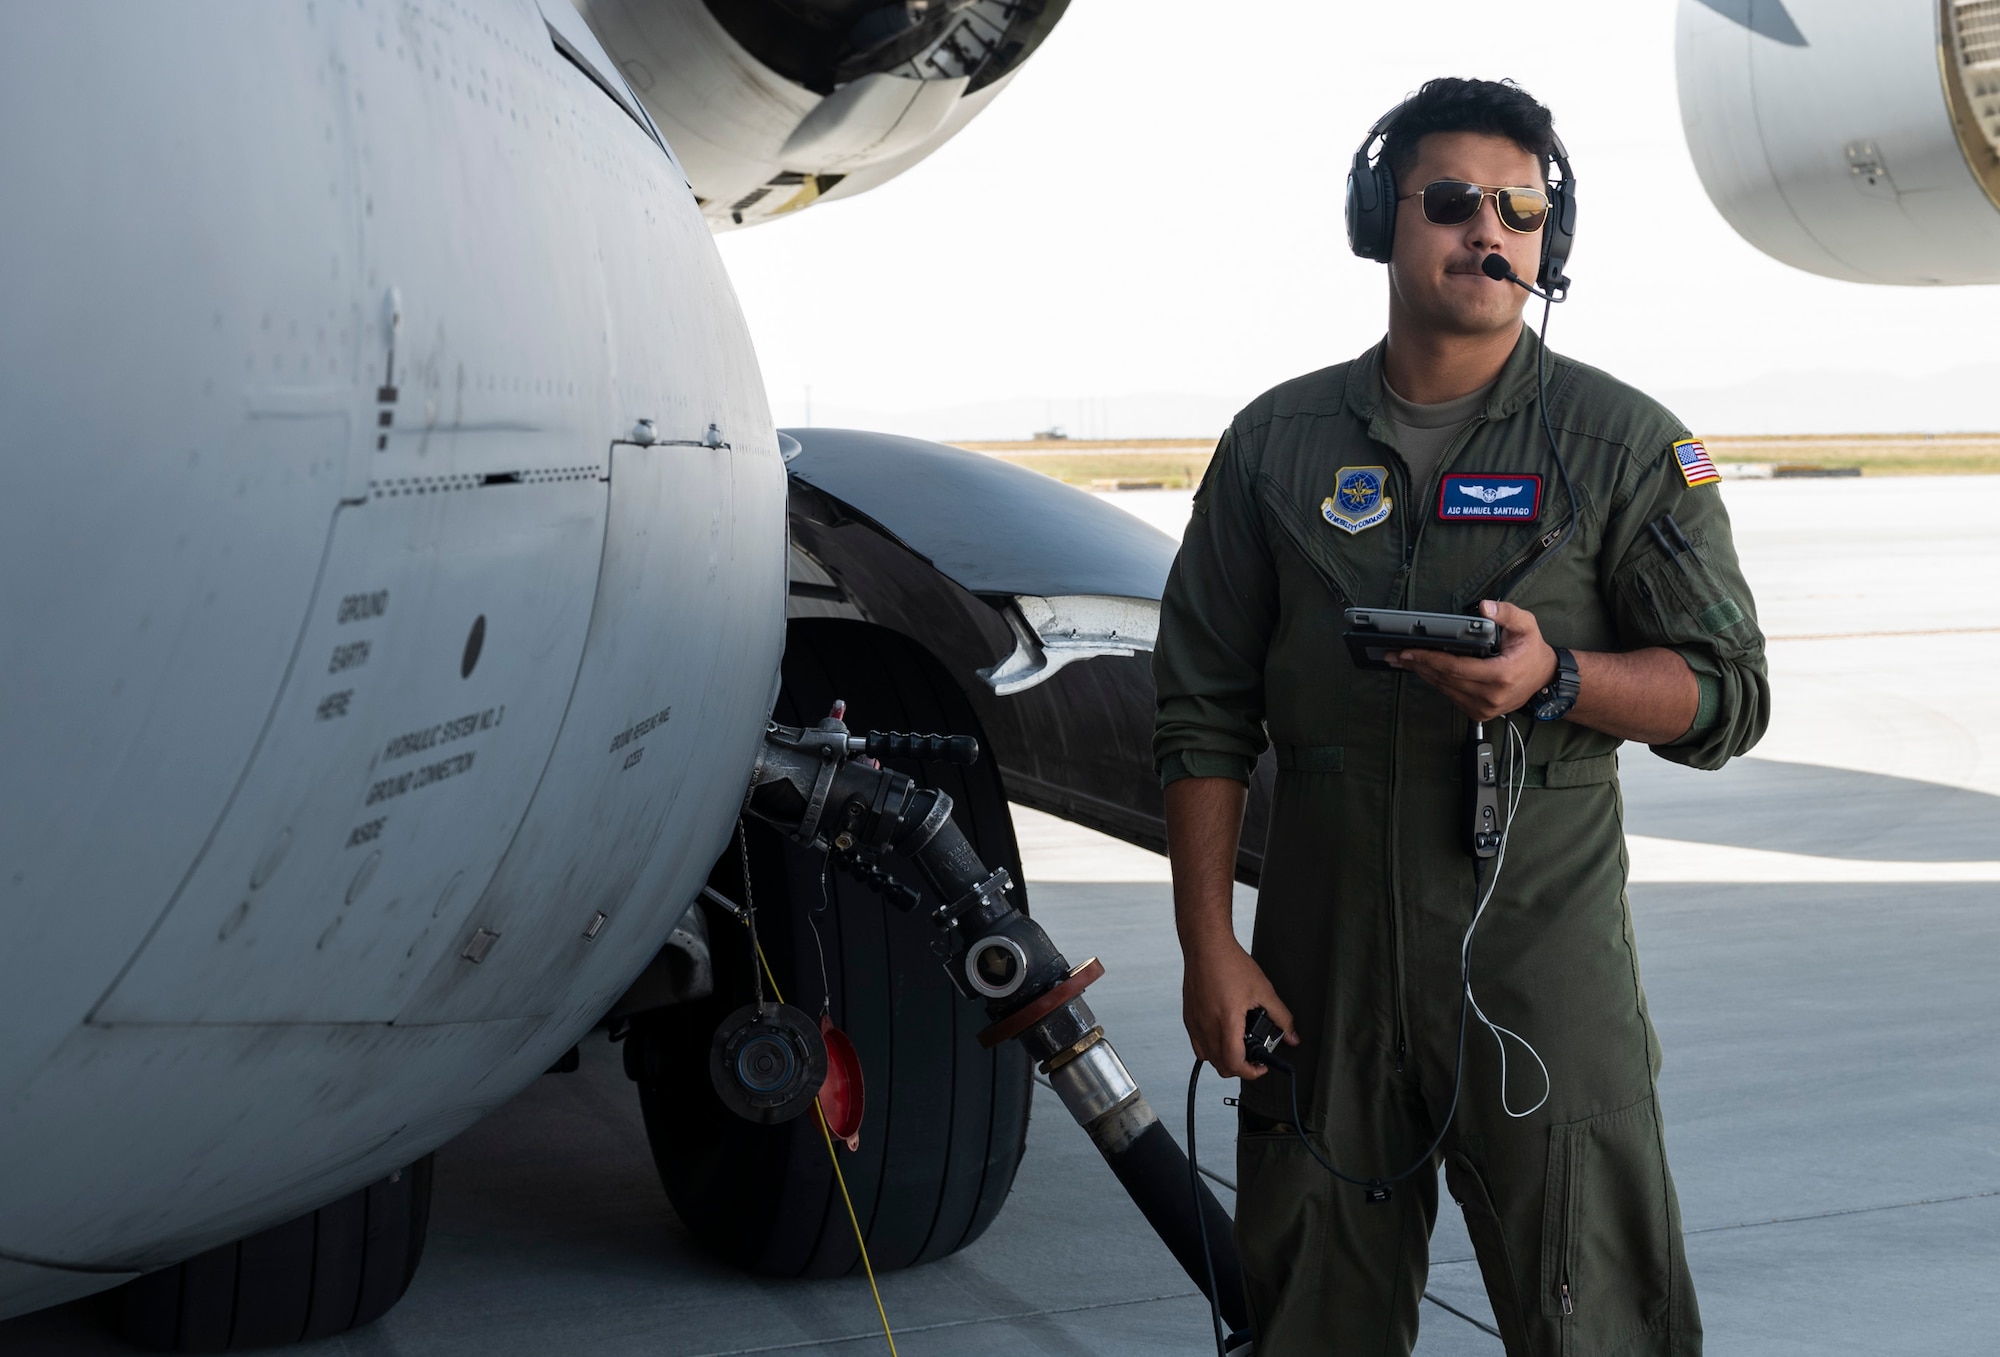 U.S. Air Force Airman 1st Class Manuel Santiago, a loadmaster with the 4th Airlift Squadron, reviews a checklist while performing specialized fueling operations during Exercise Rainier War 23A at Mountain Home Air Force Base, Idaho, Sept. 25, 2023. Rainier War is an annual exercise led by the 62d Airlift Wing designed to evaluate the ability to generate, employ and sustain in-garrison and forward deployed forces. These exercises are necessary in assessing and maintaining wartime operational tempos, ensuring command and control across multiple locations. During the exercise, Airmen will respond to scenarios that replicate today’s contingency operations and will address full-spectrum readiness against modern threats brought on by peer adversaries. (U.S. Air Force photo by Staff Sgt. Rachel Williams)